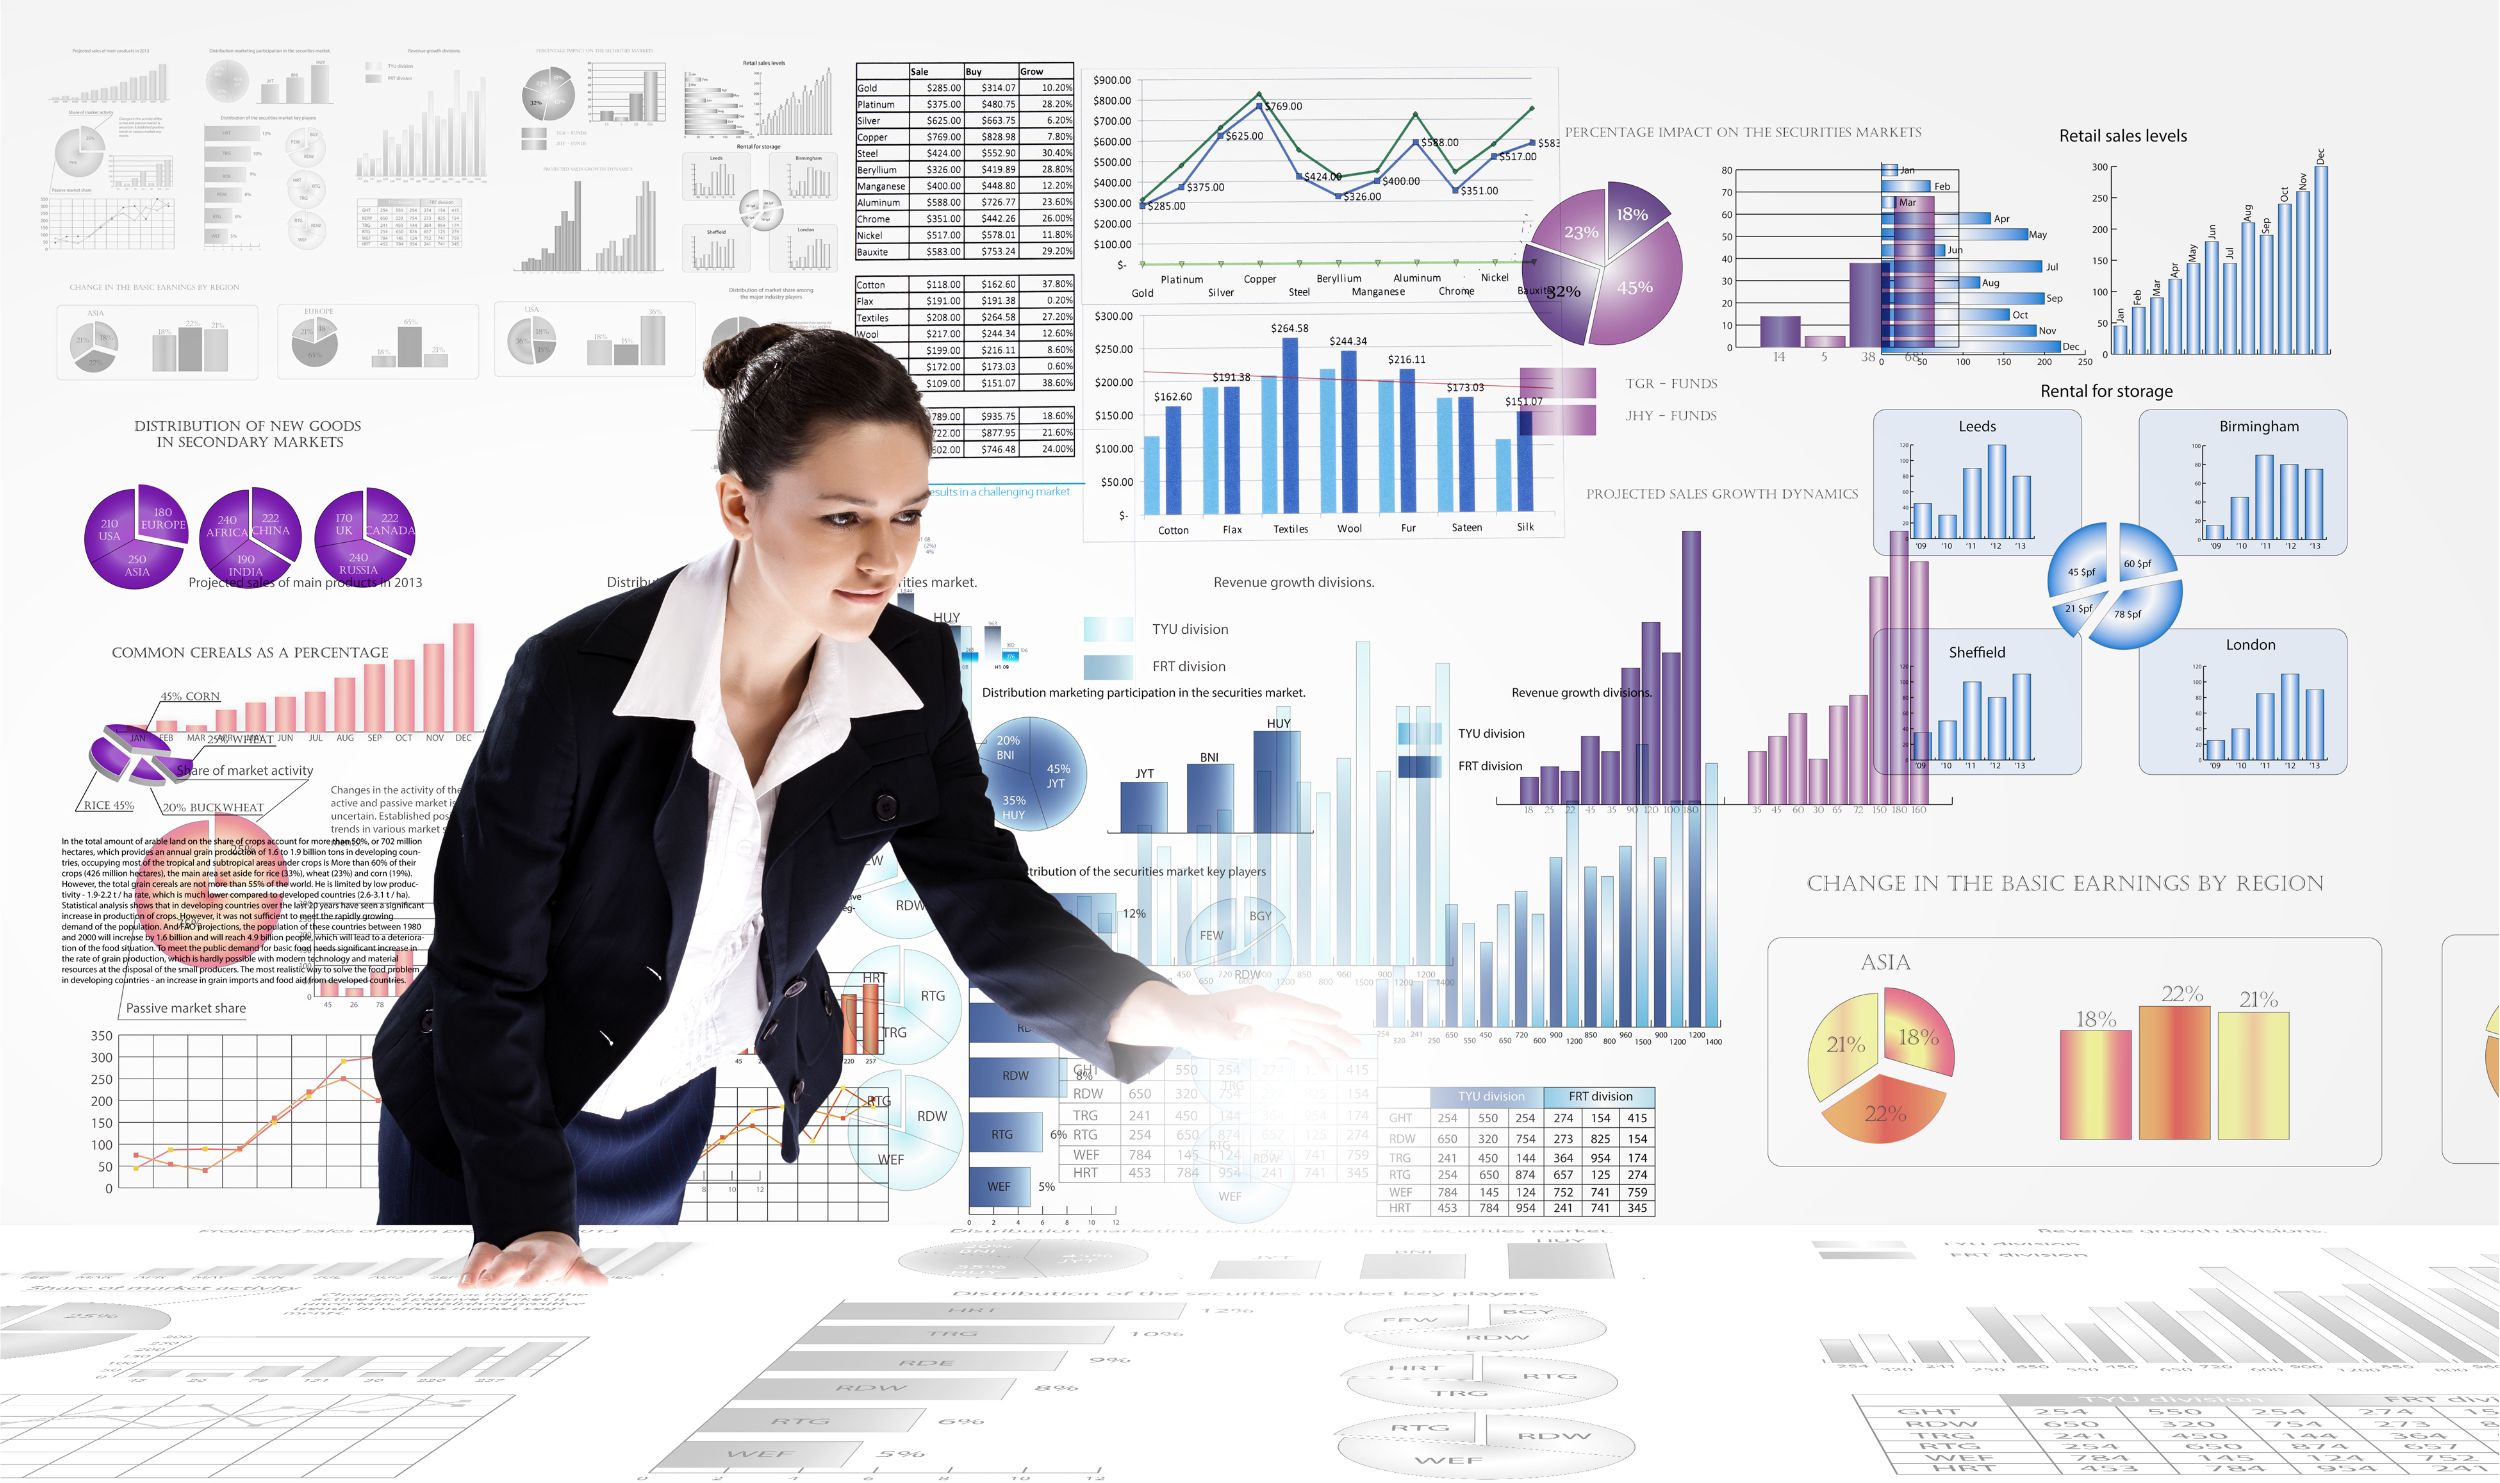 Perspective Analytics image of woman analyzing data reports.